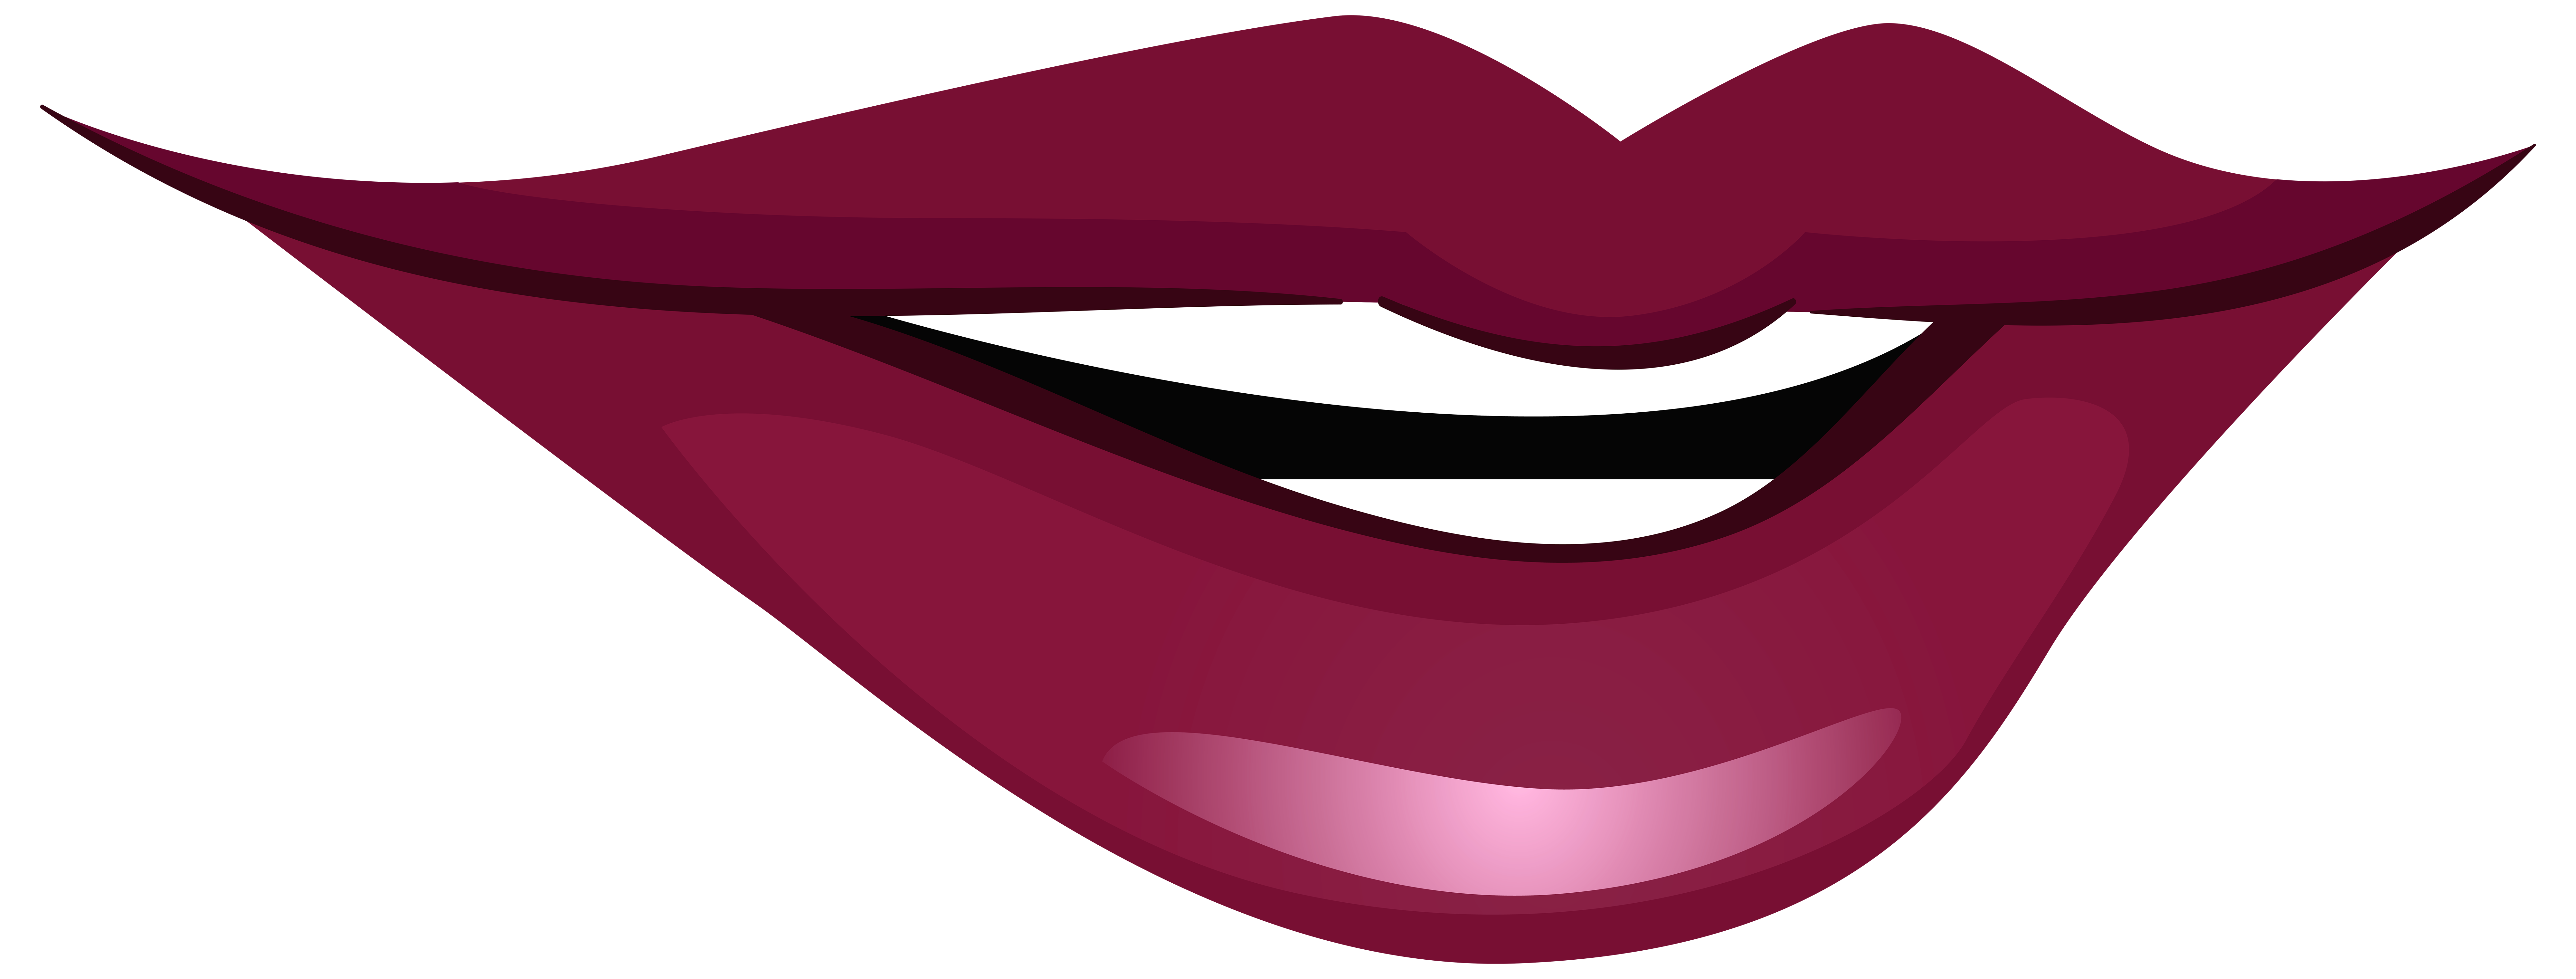 clipart smiling lips - photo #33